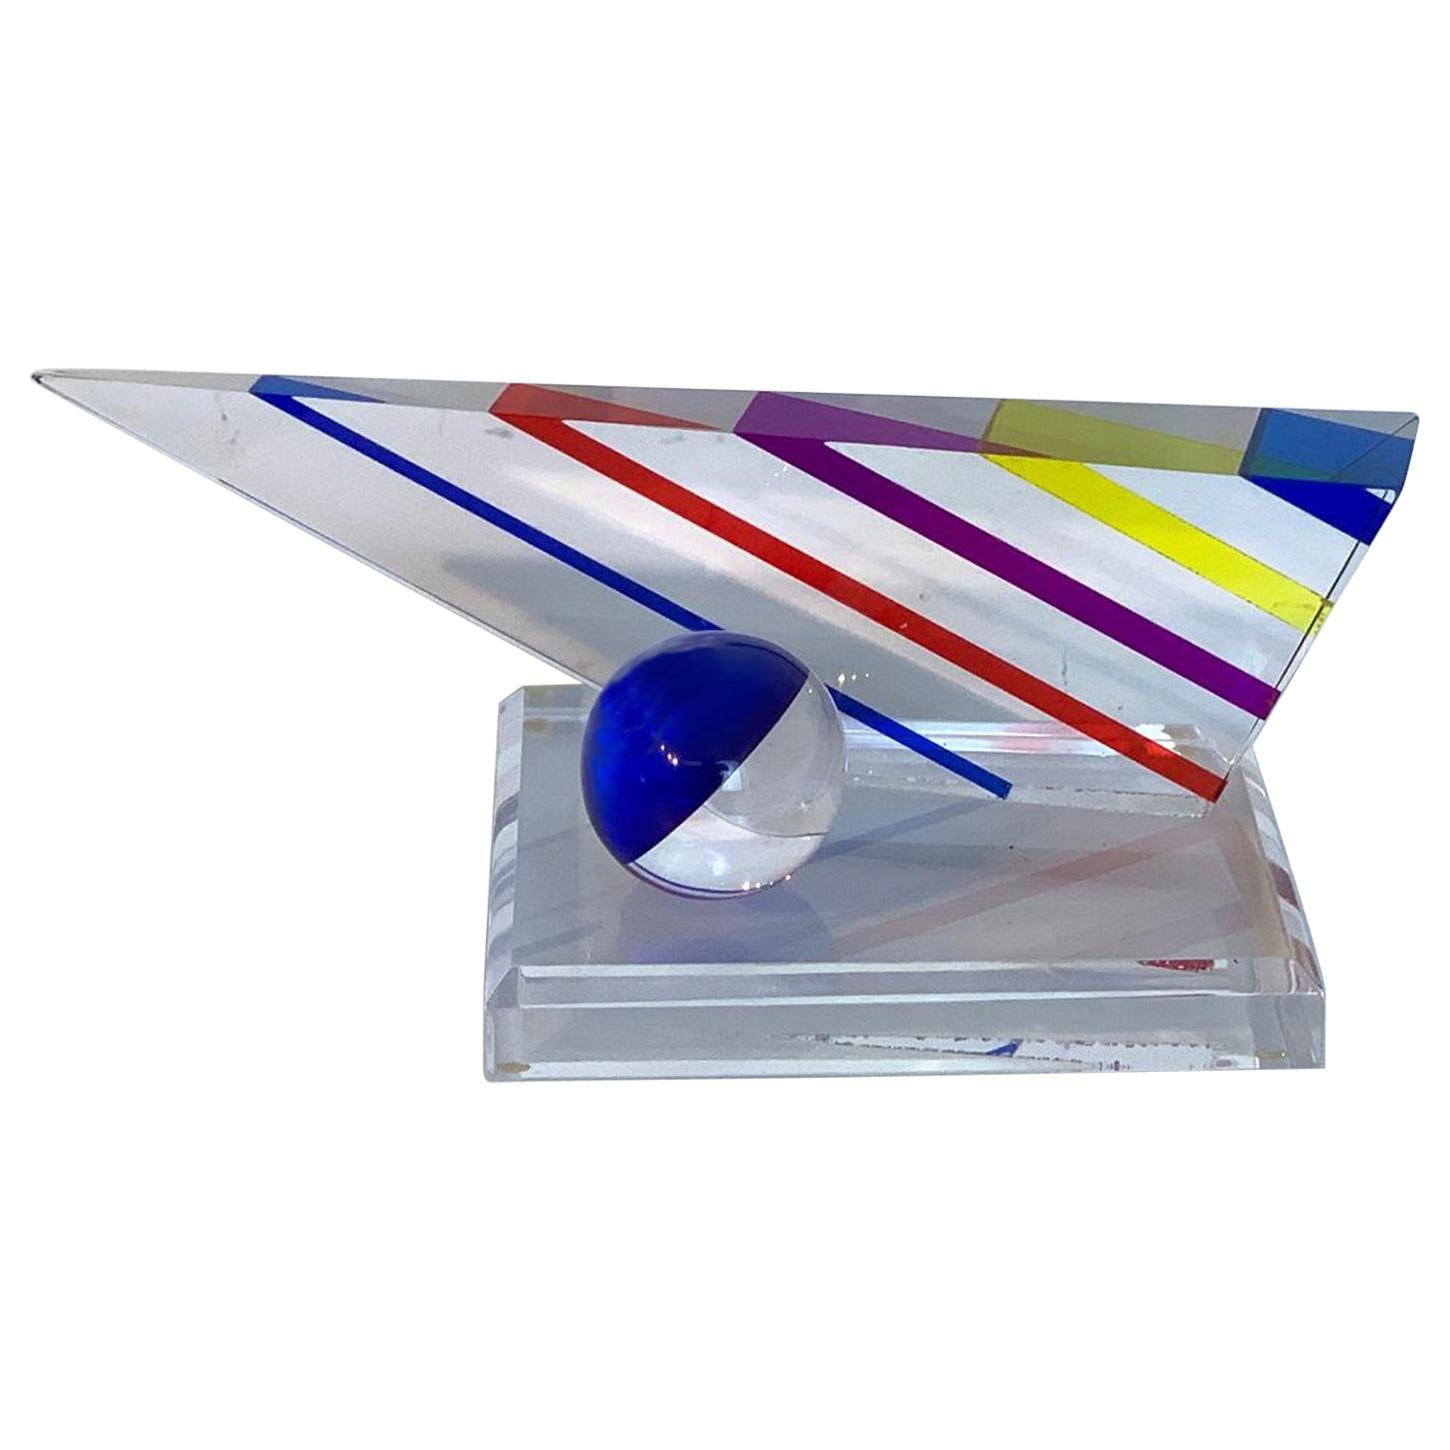 Midcentury Lucite Multi-Colored Triangular Geometric Sculpture by Will Grant